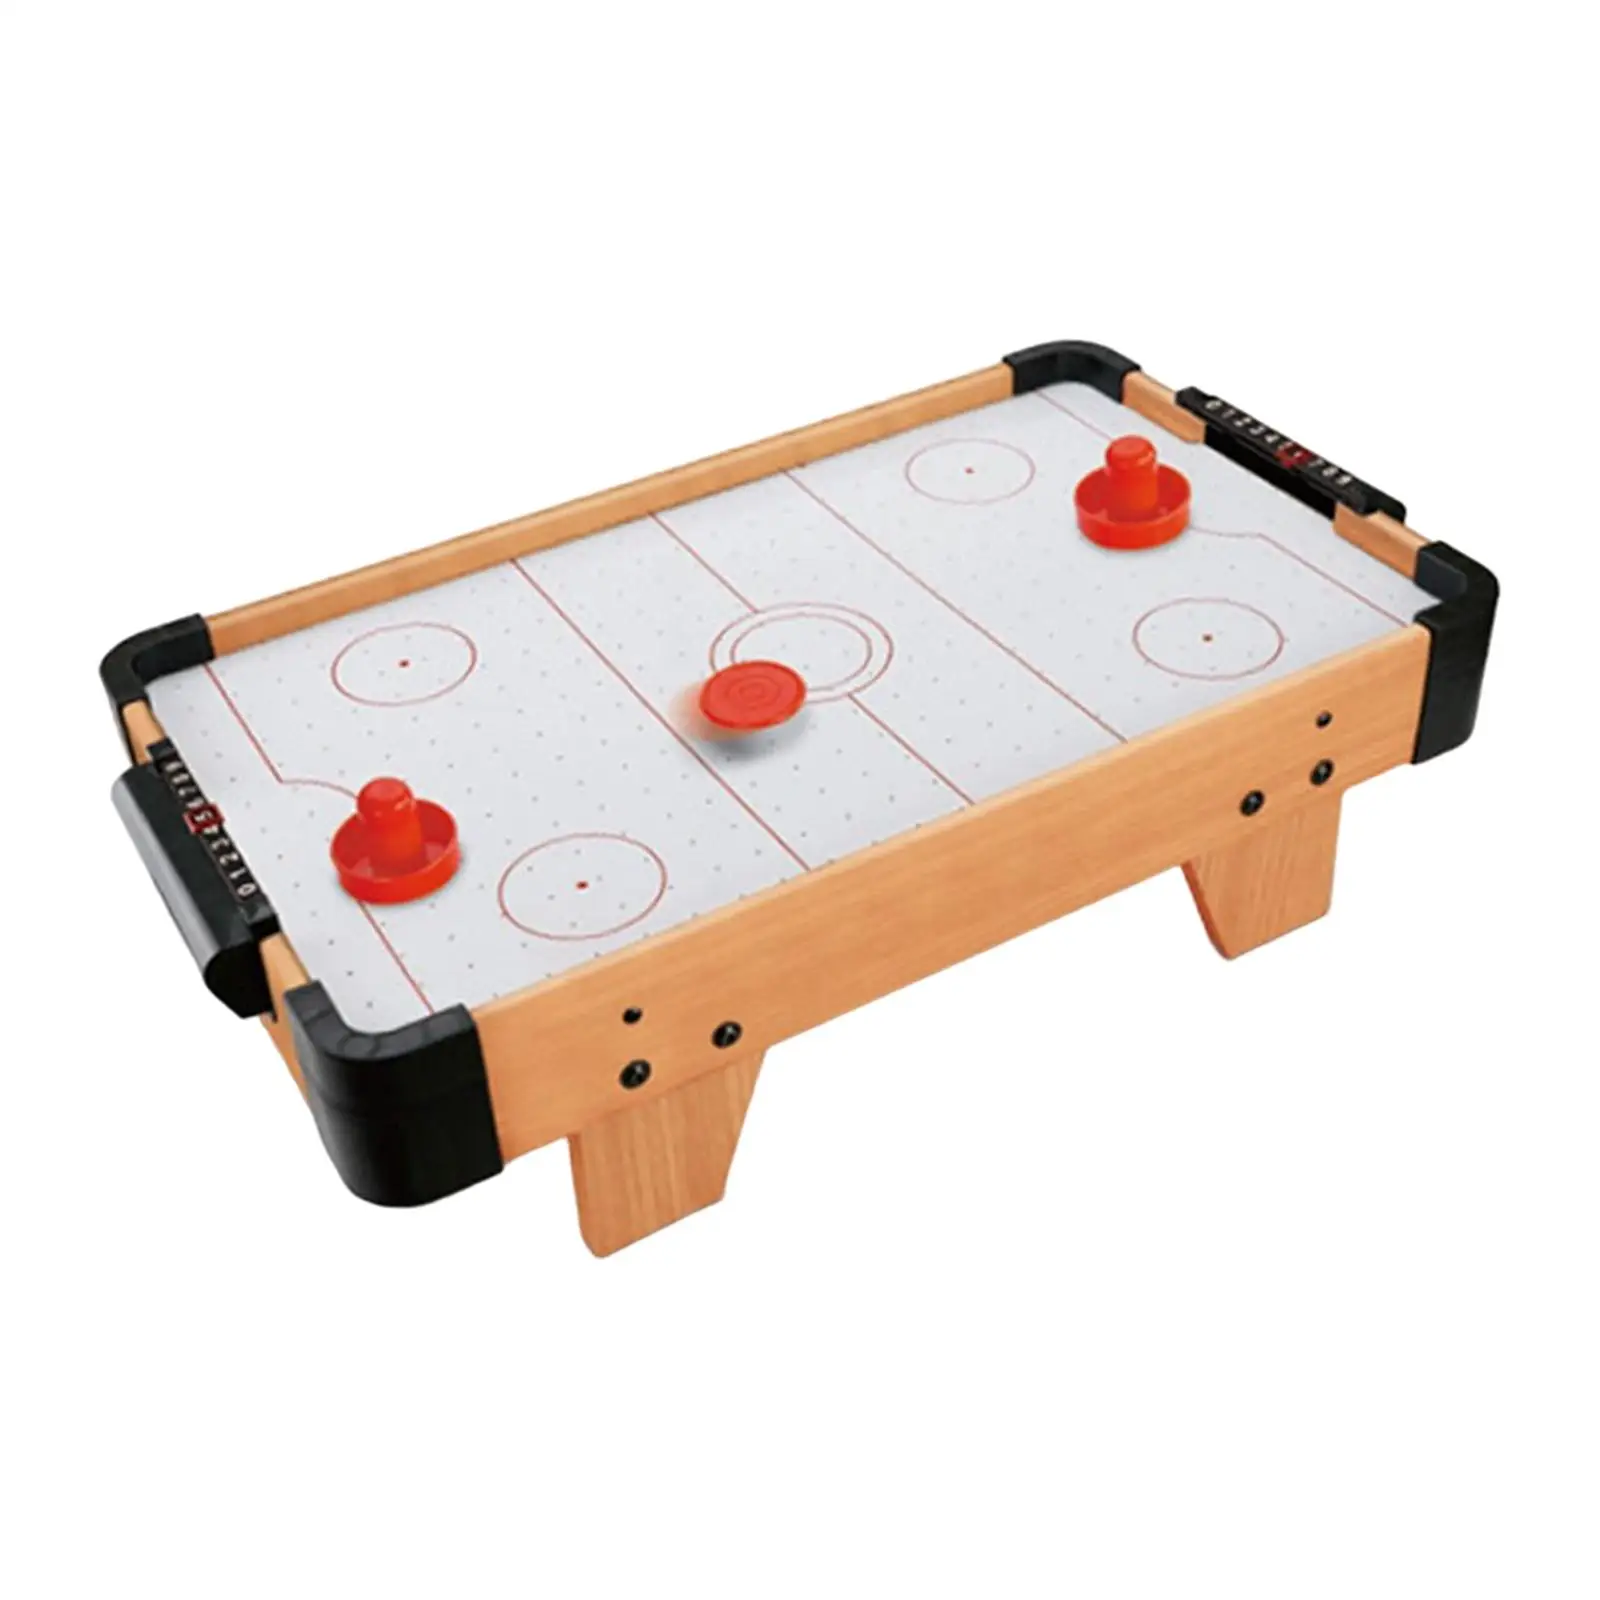 Air Hockey Board Game,Parent Child Interactive Desktop Playing Field,Family Game for Girls Boys Children Toddler Kids